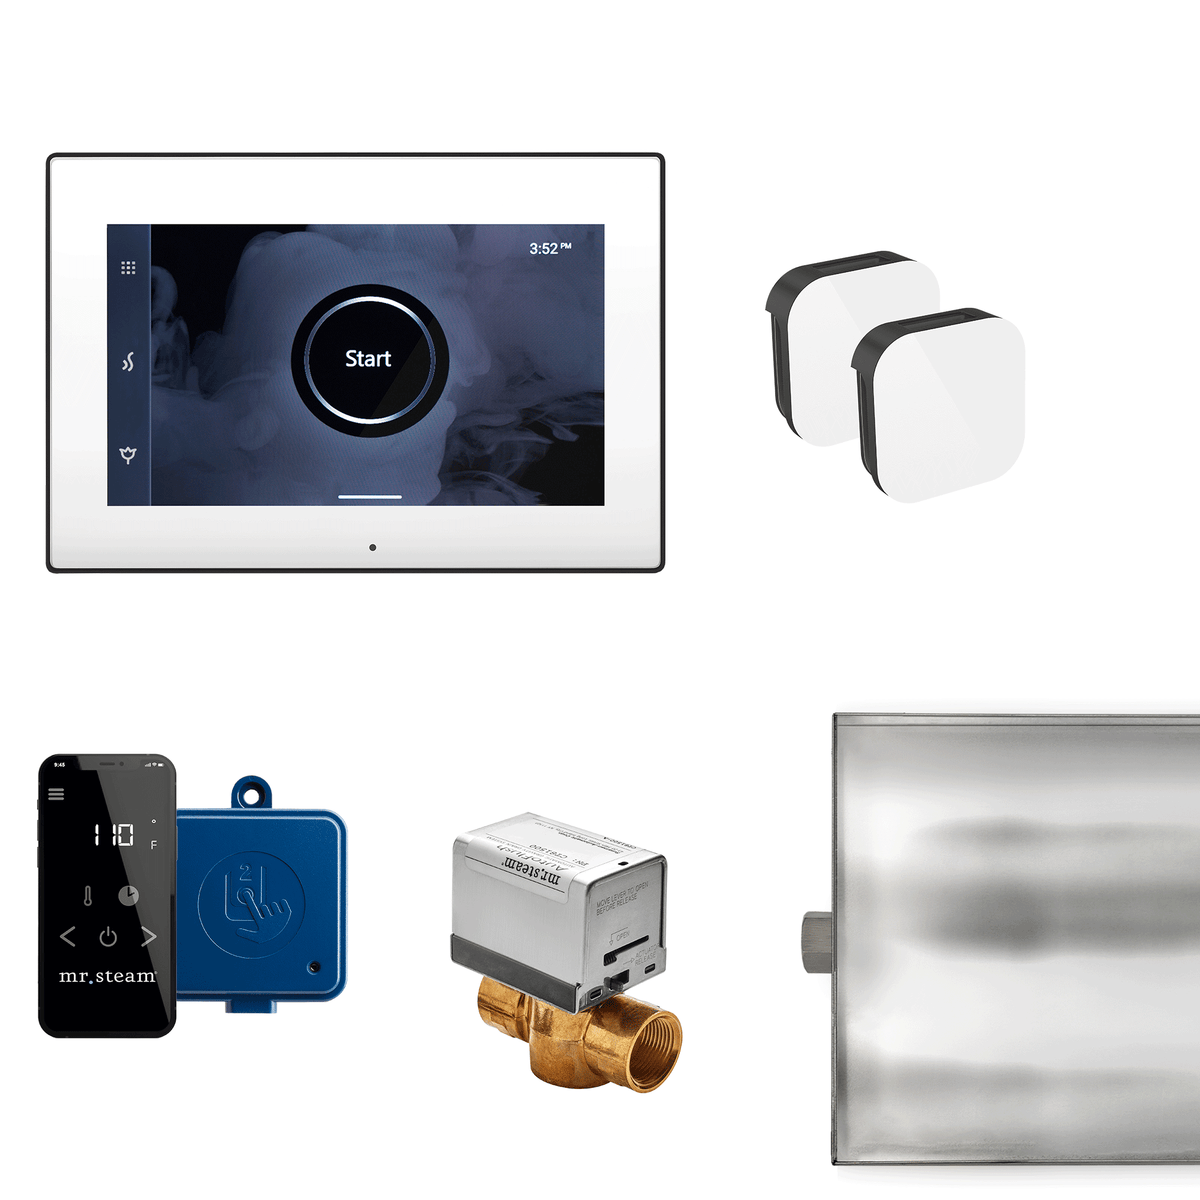 XBTLRWHXMB_Mr. Steam_XButler Max Steam Shower Control Package with iSteamX Control and Aroma Glass SteamHead